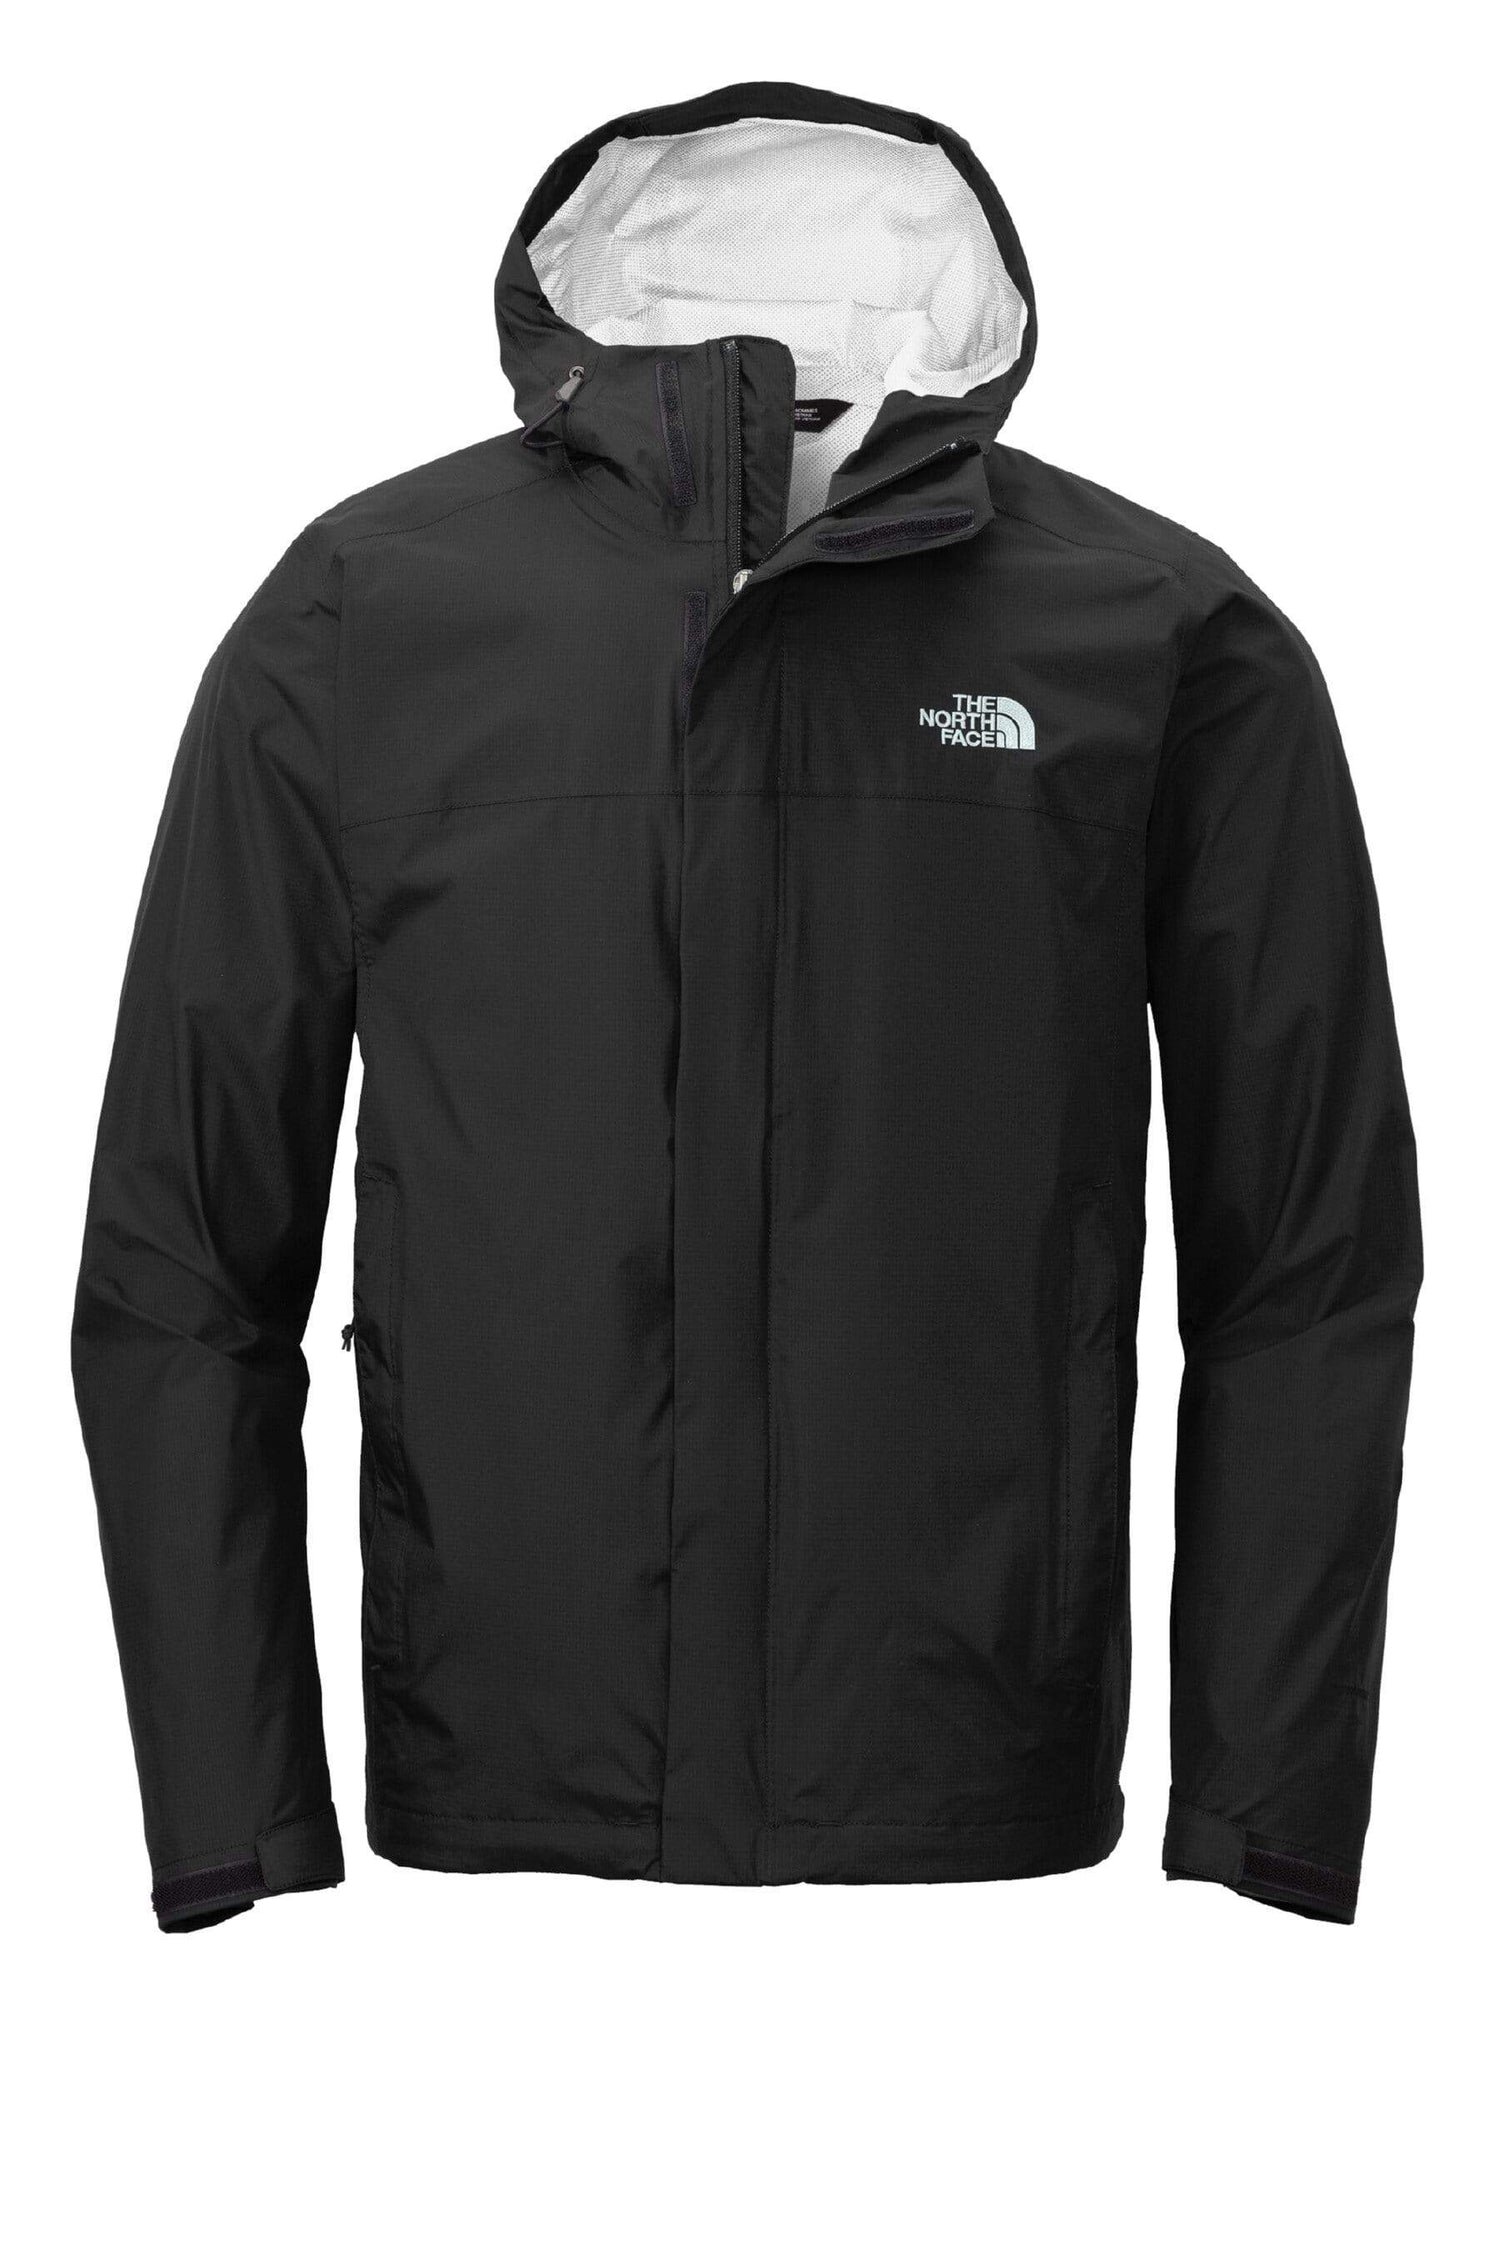 The North Face NF0A3LH4 DryVent Rain Jacket - Shady Blue - S